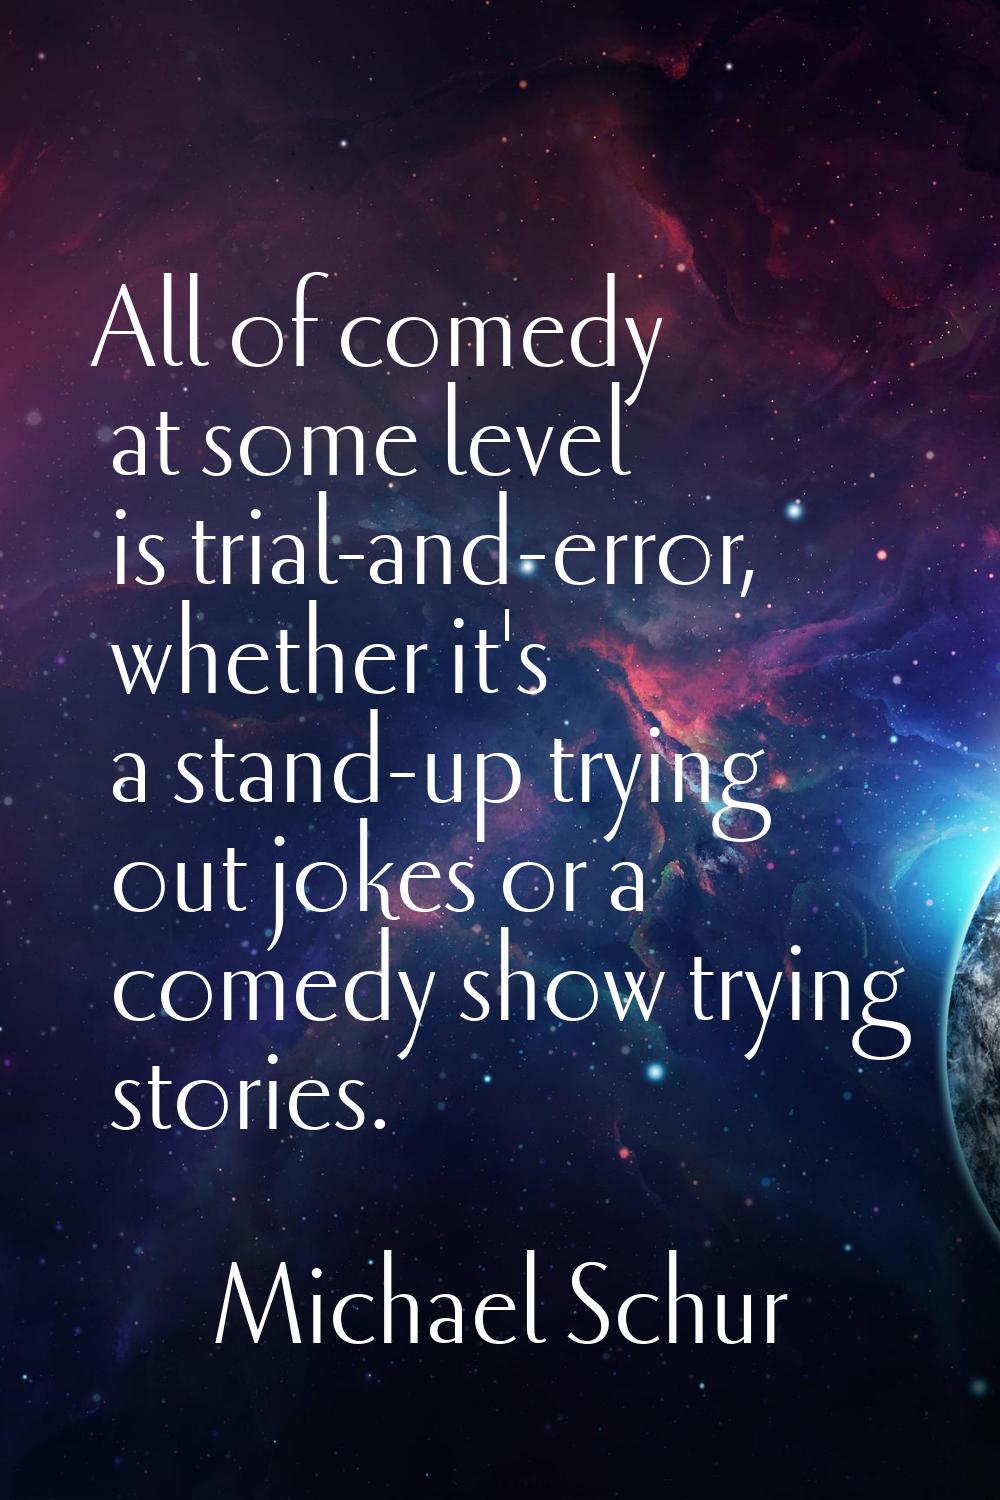 All of comedy at some level is trial-and-error, whether it's a stand-up trying out jokes or a comed